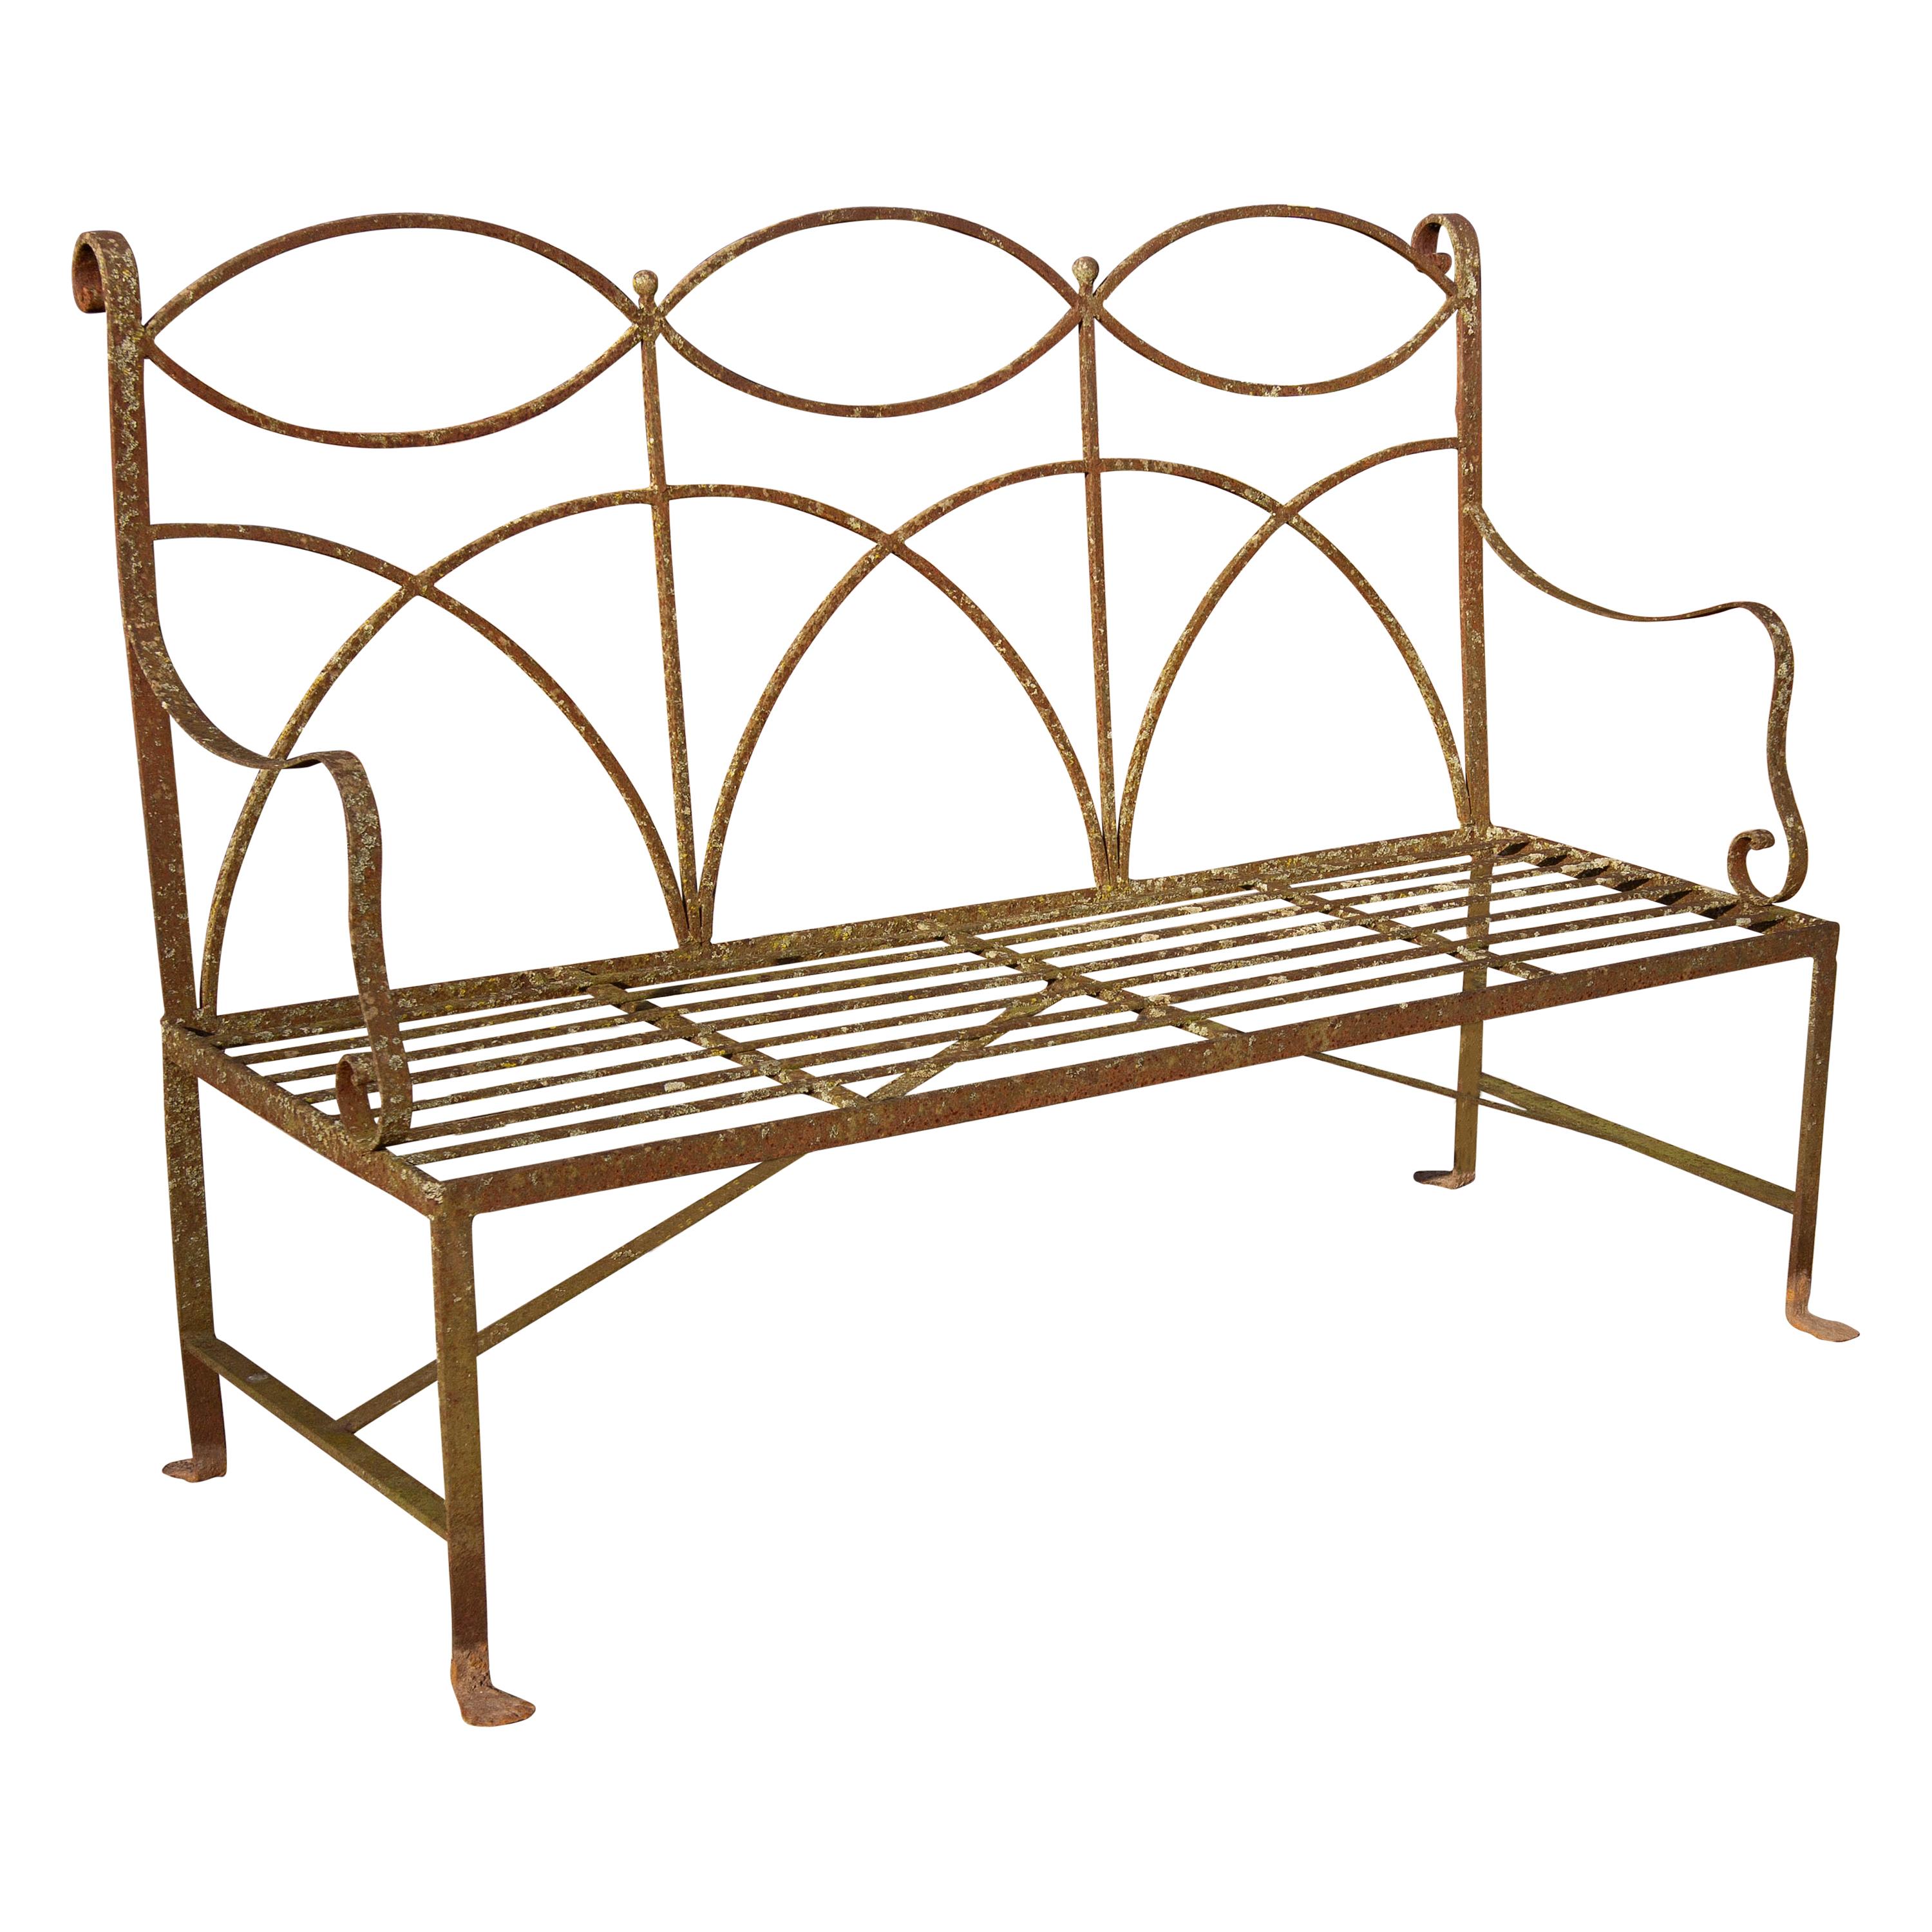 Wrought iron neoclassical garden bench. Simple elegant lines. Wonderful weathered surface. Handmade, circa 1900s-1920s. Seats four. Structurally sound.